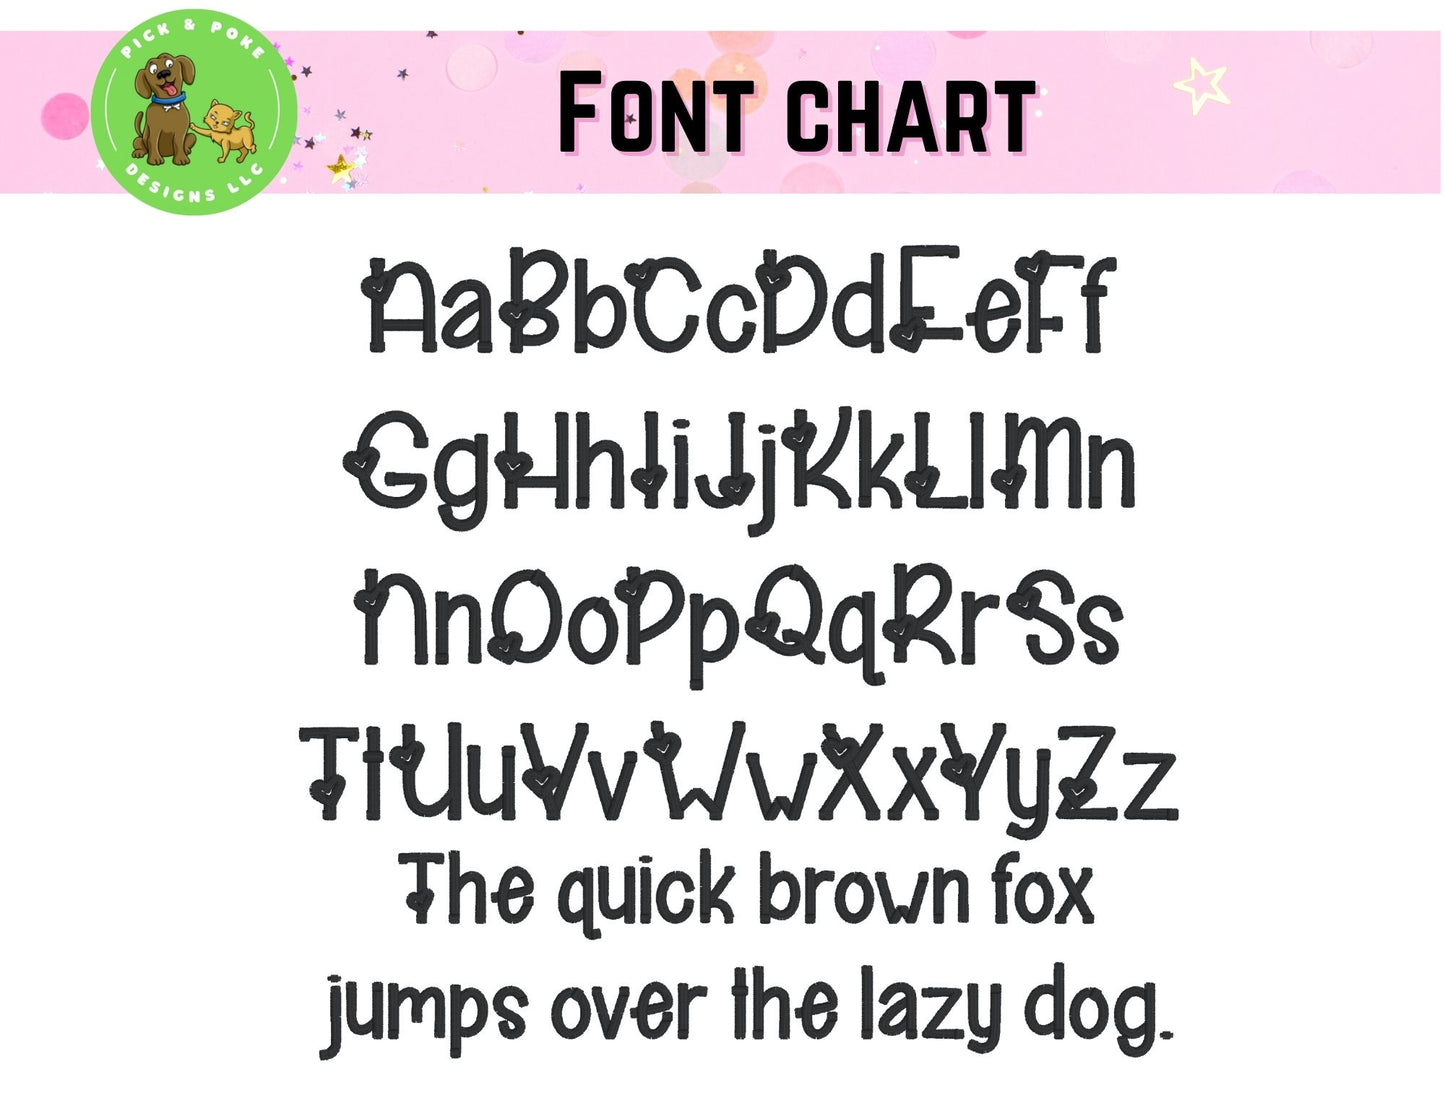 Font chart for embroidered teacher apple shirt. Capital letters of the font feature a stylized heart design. 